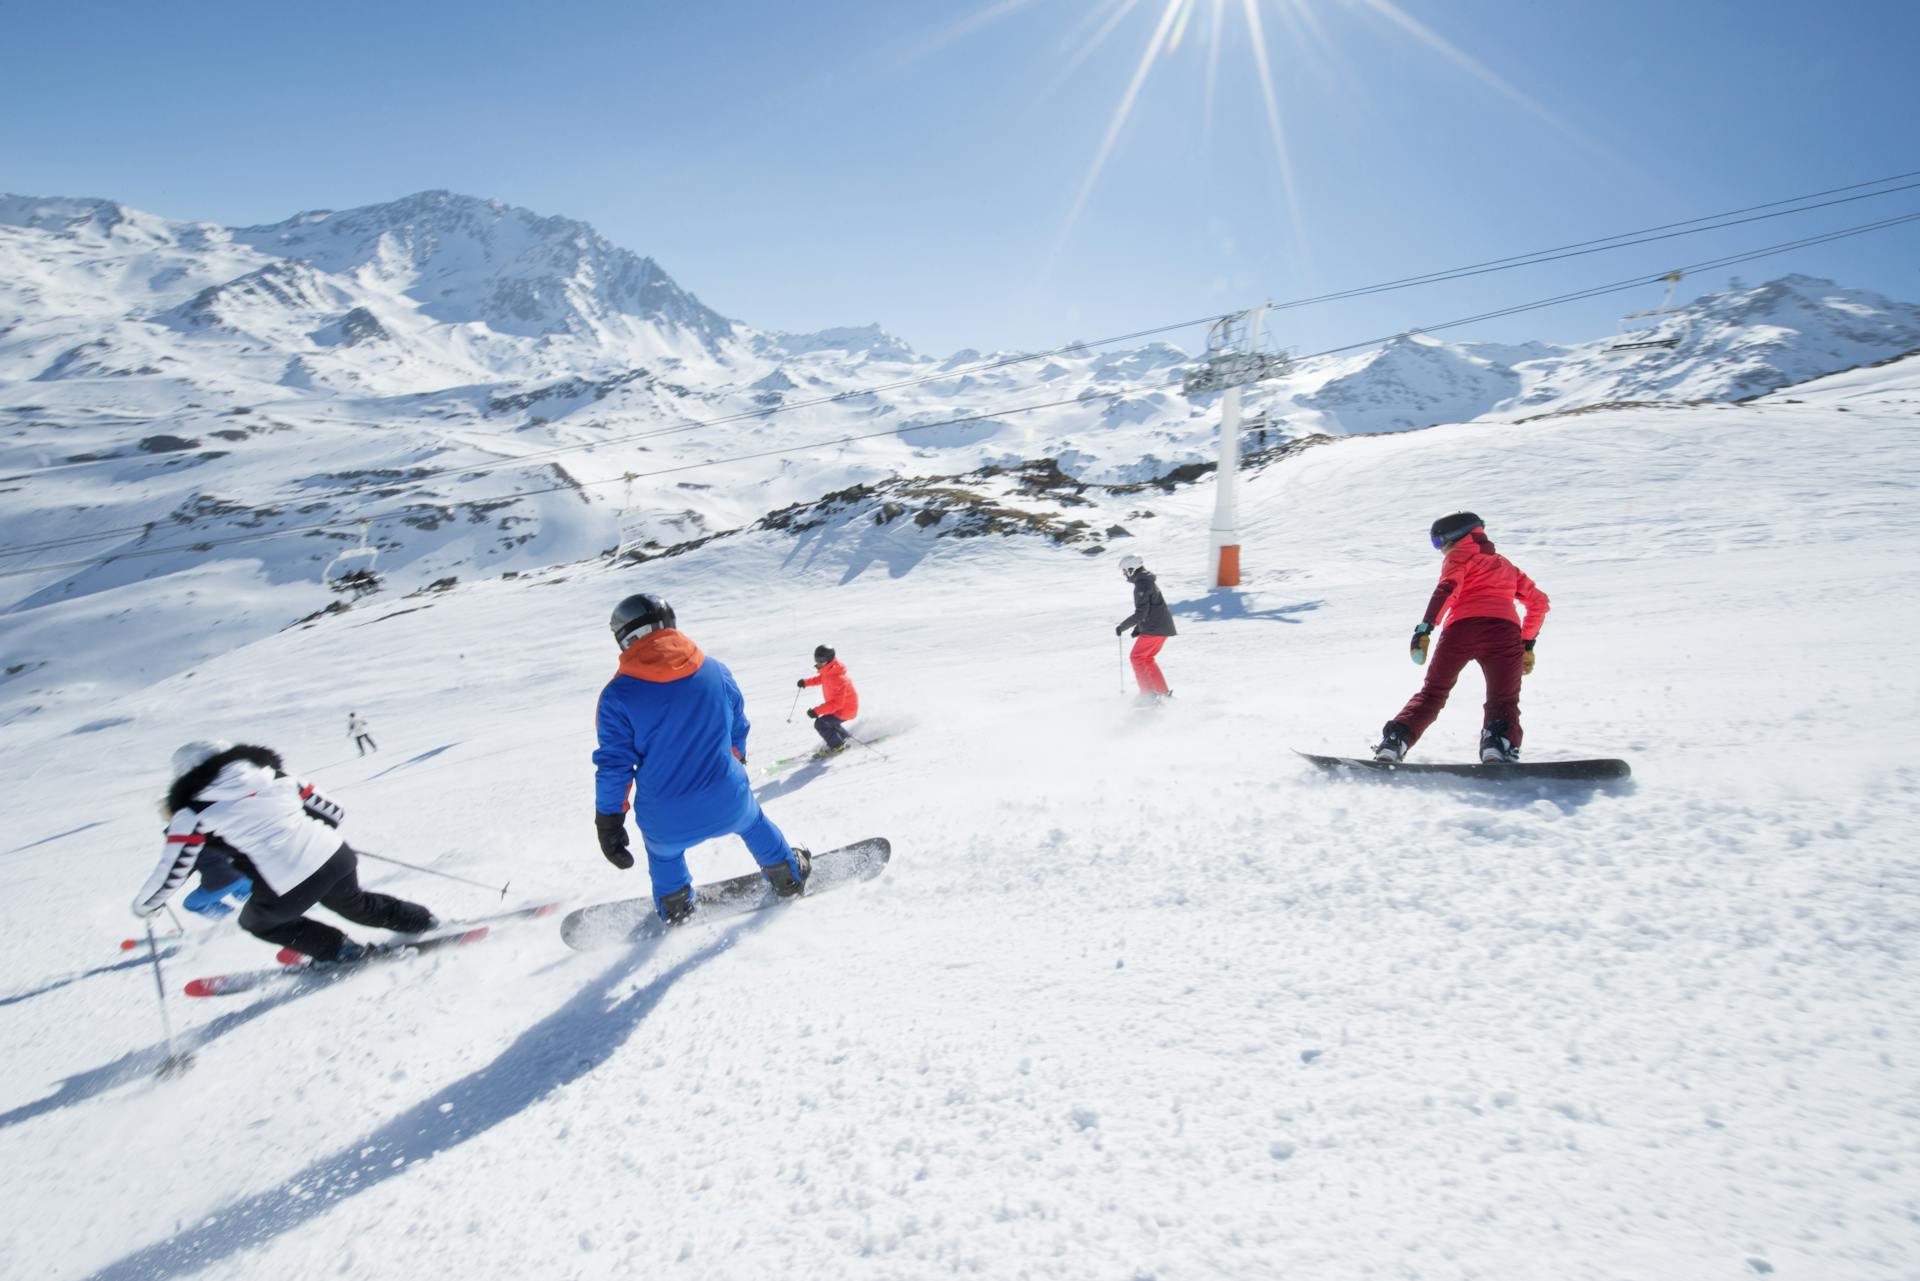 Family skiing and snowboarding together at Val Thorens ski resort